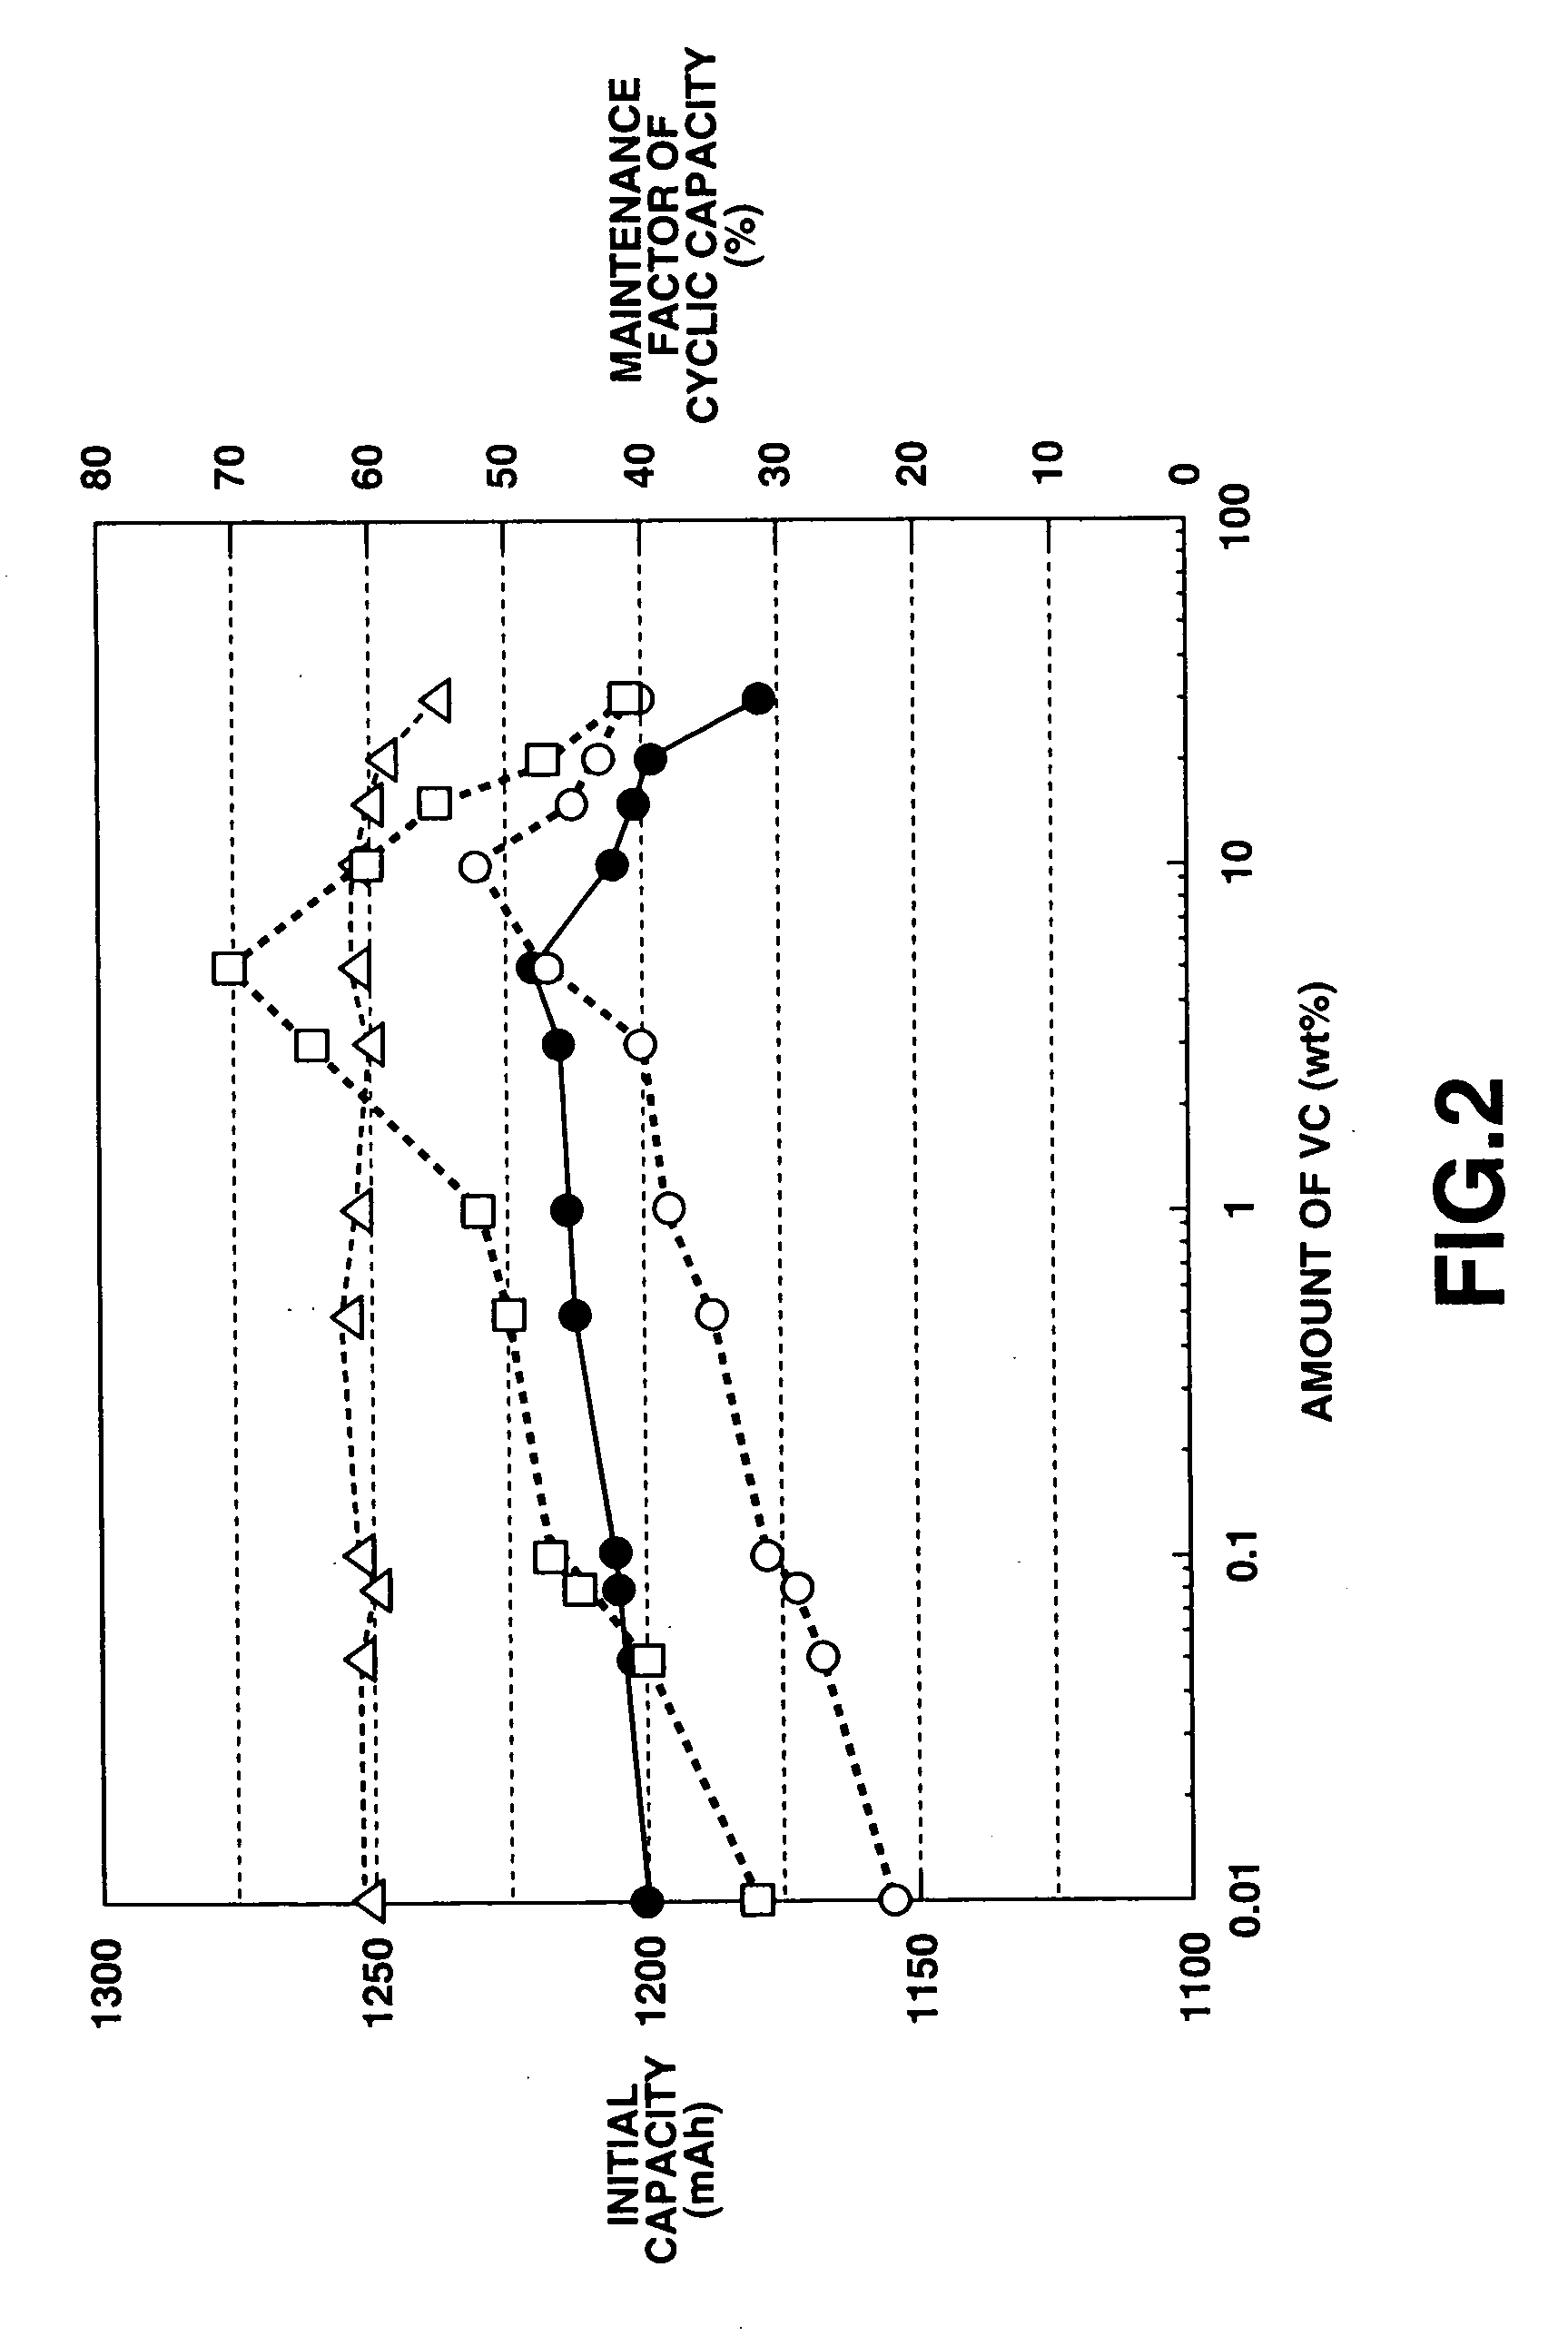 Nonaqueous electrolyte secondary battery including vinylene carbonate and an antioxidant in the electrolyte